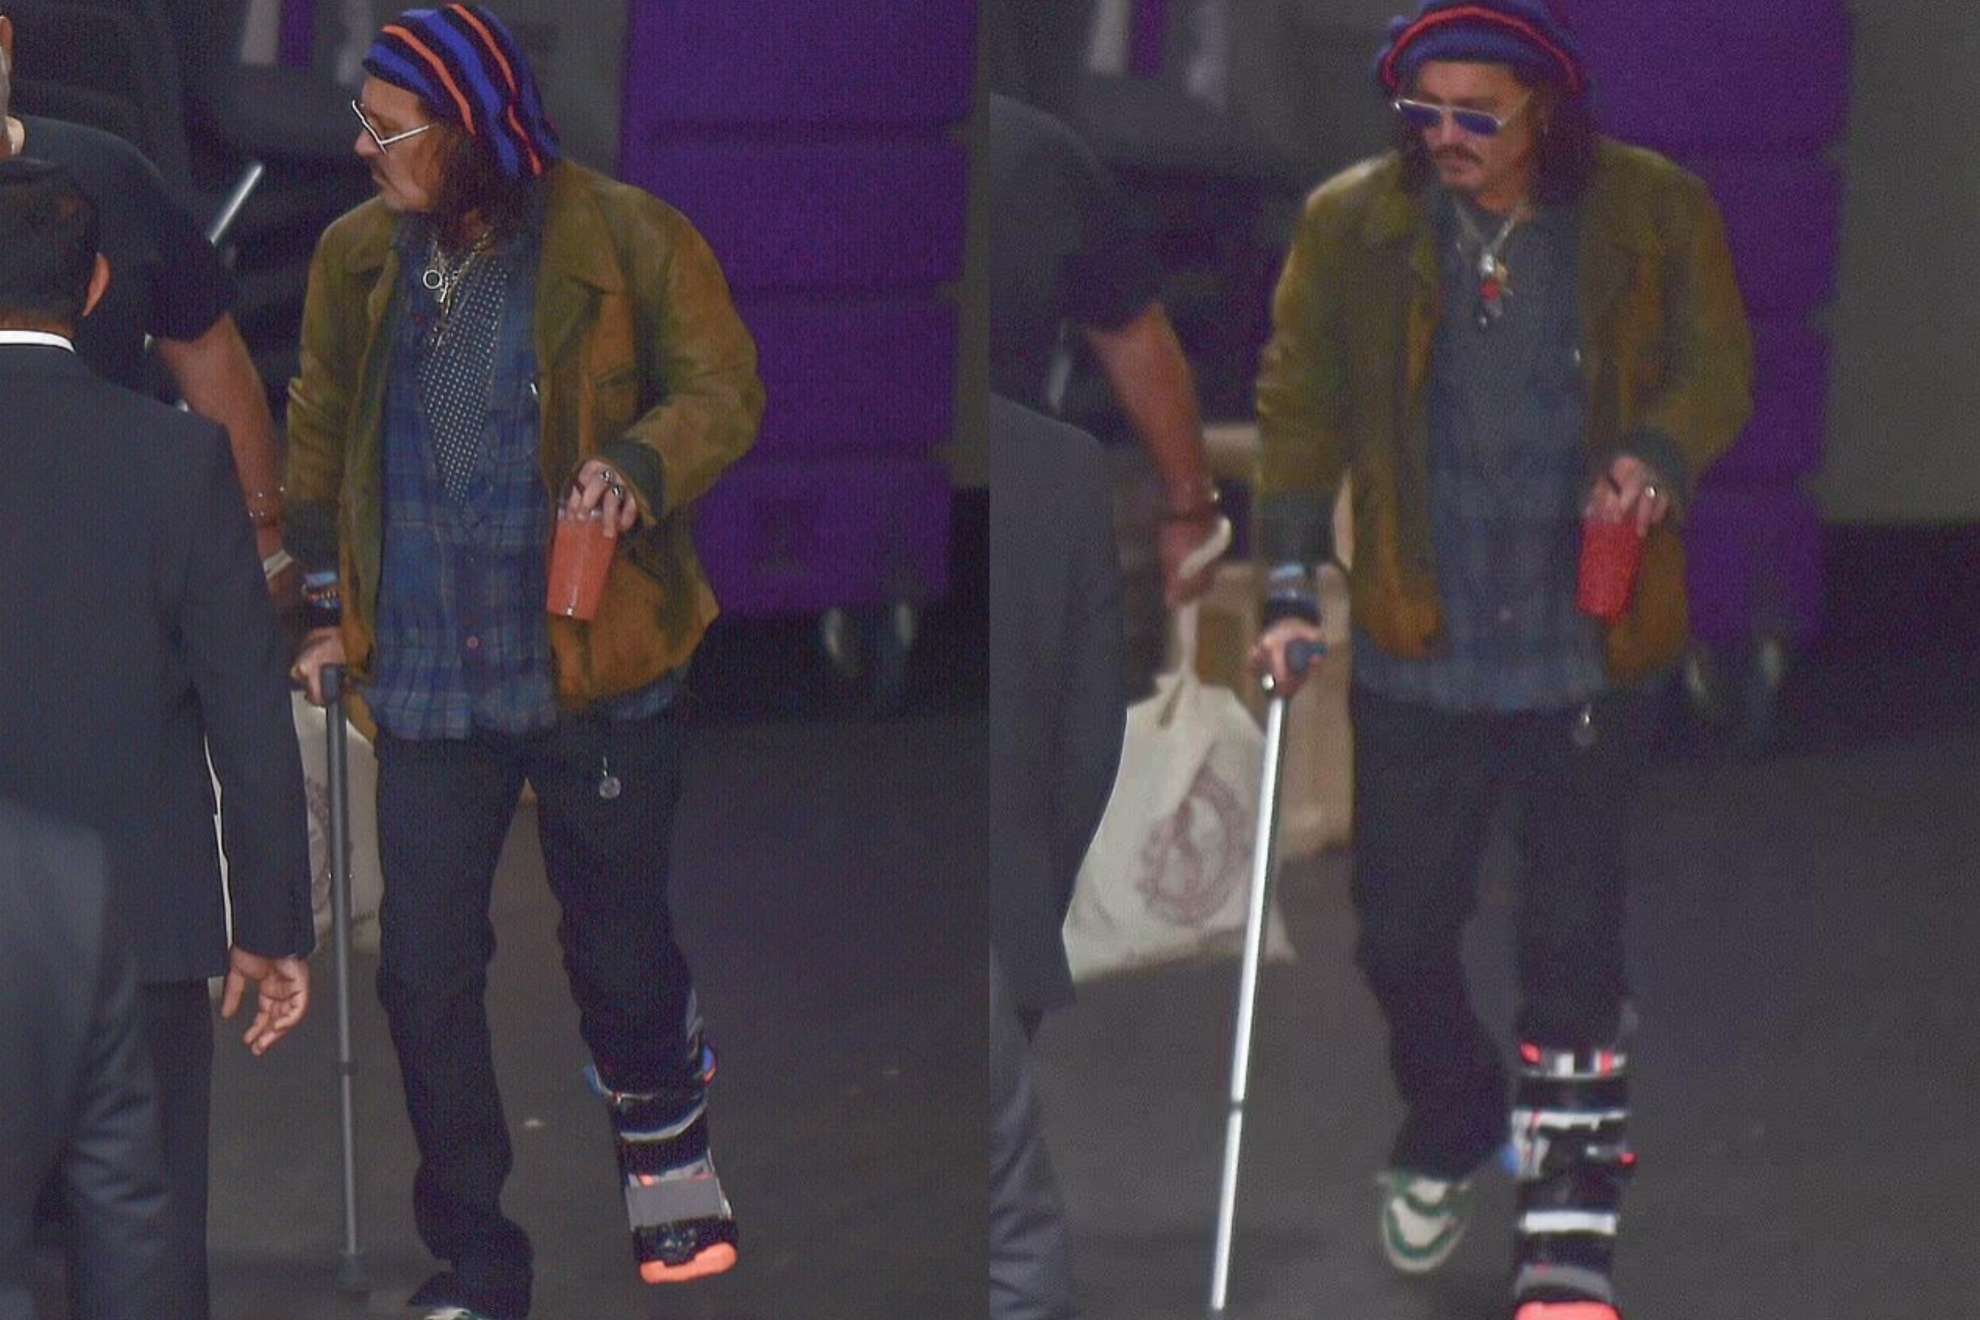 Johnny Depp wearing a medical boot